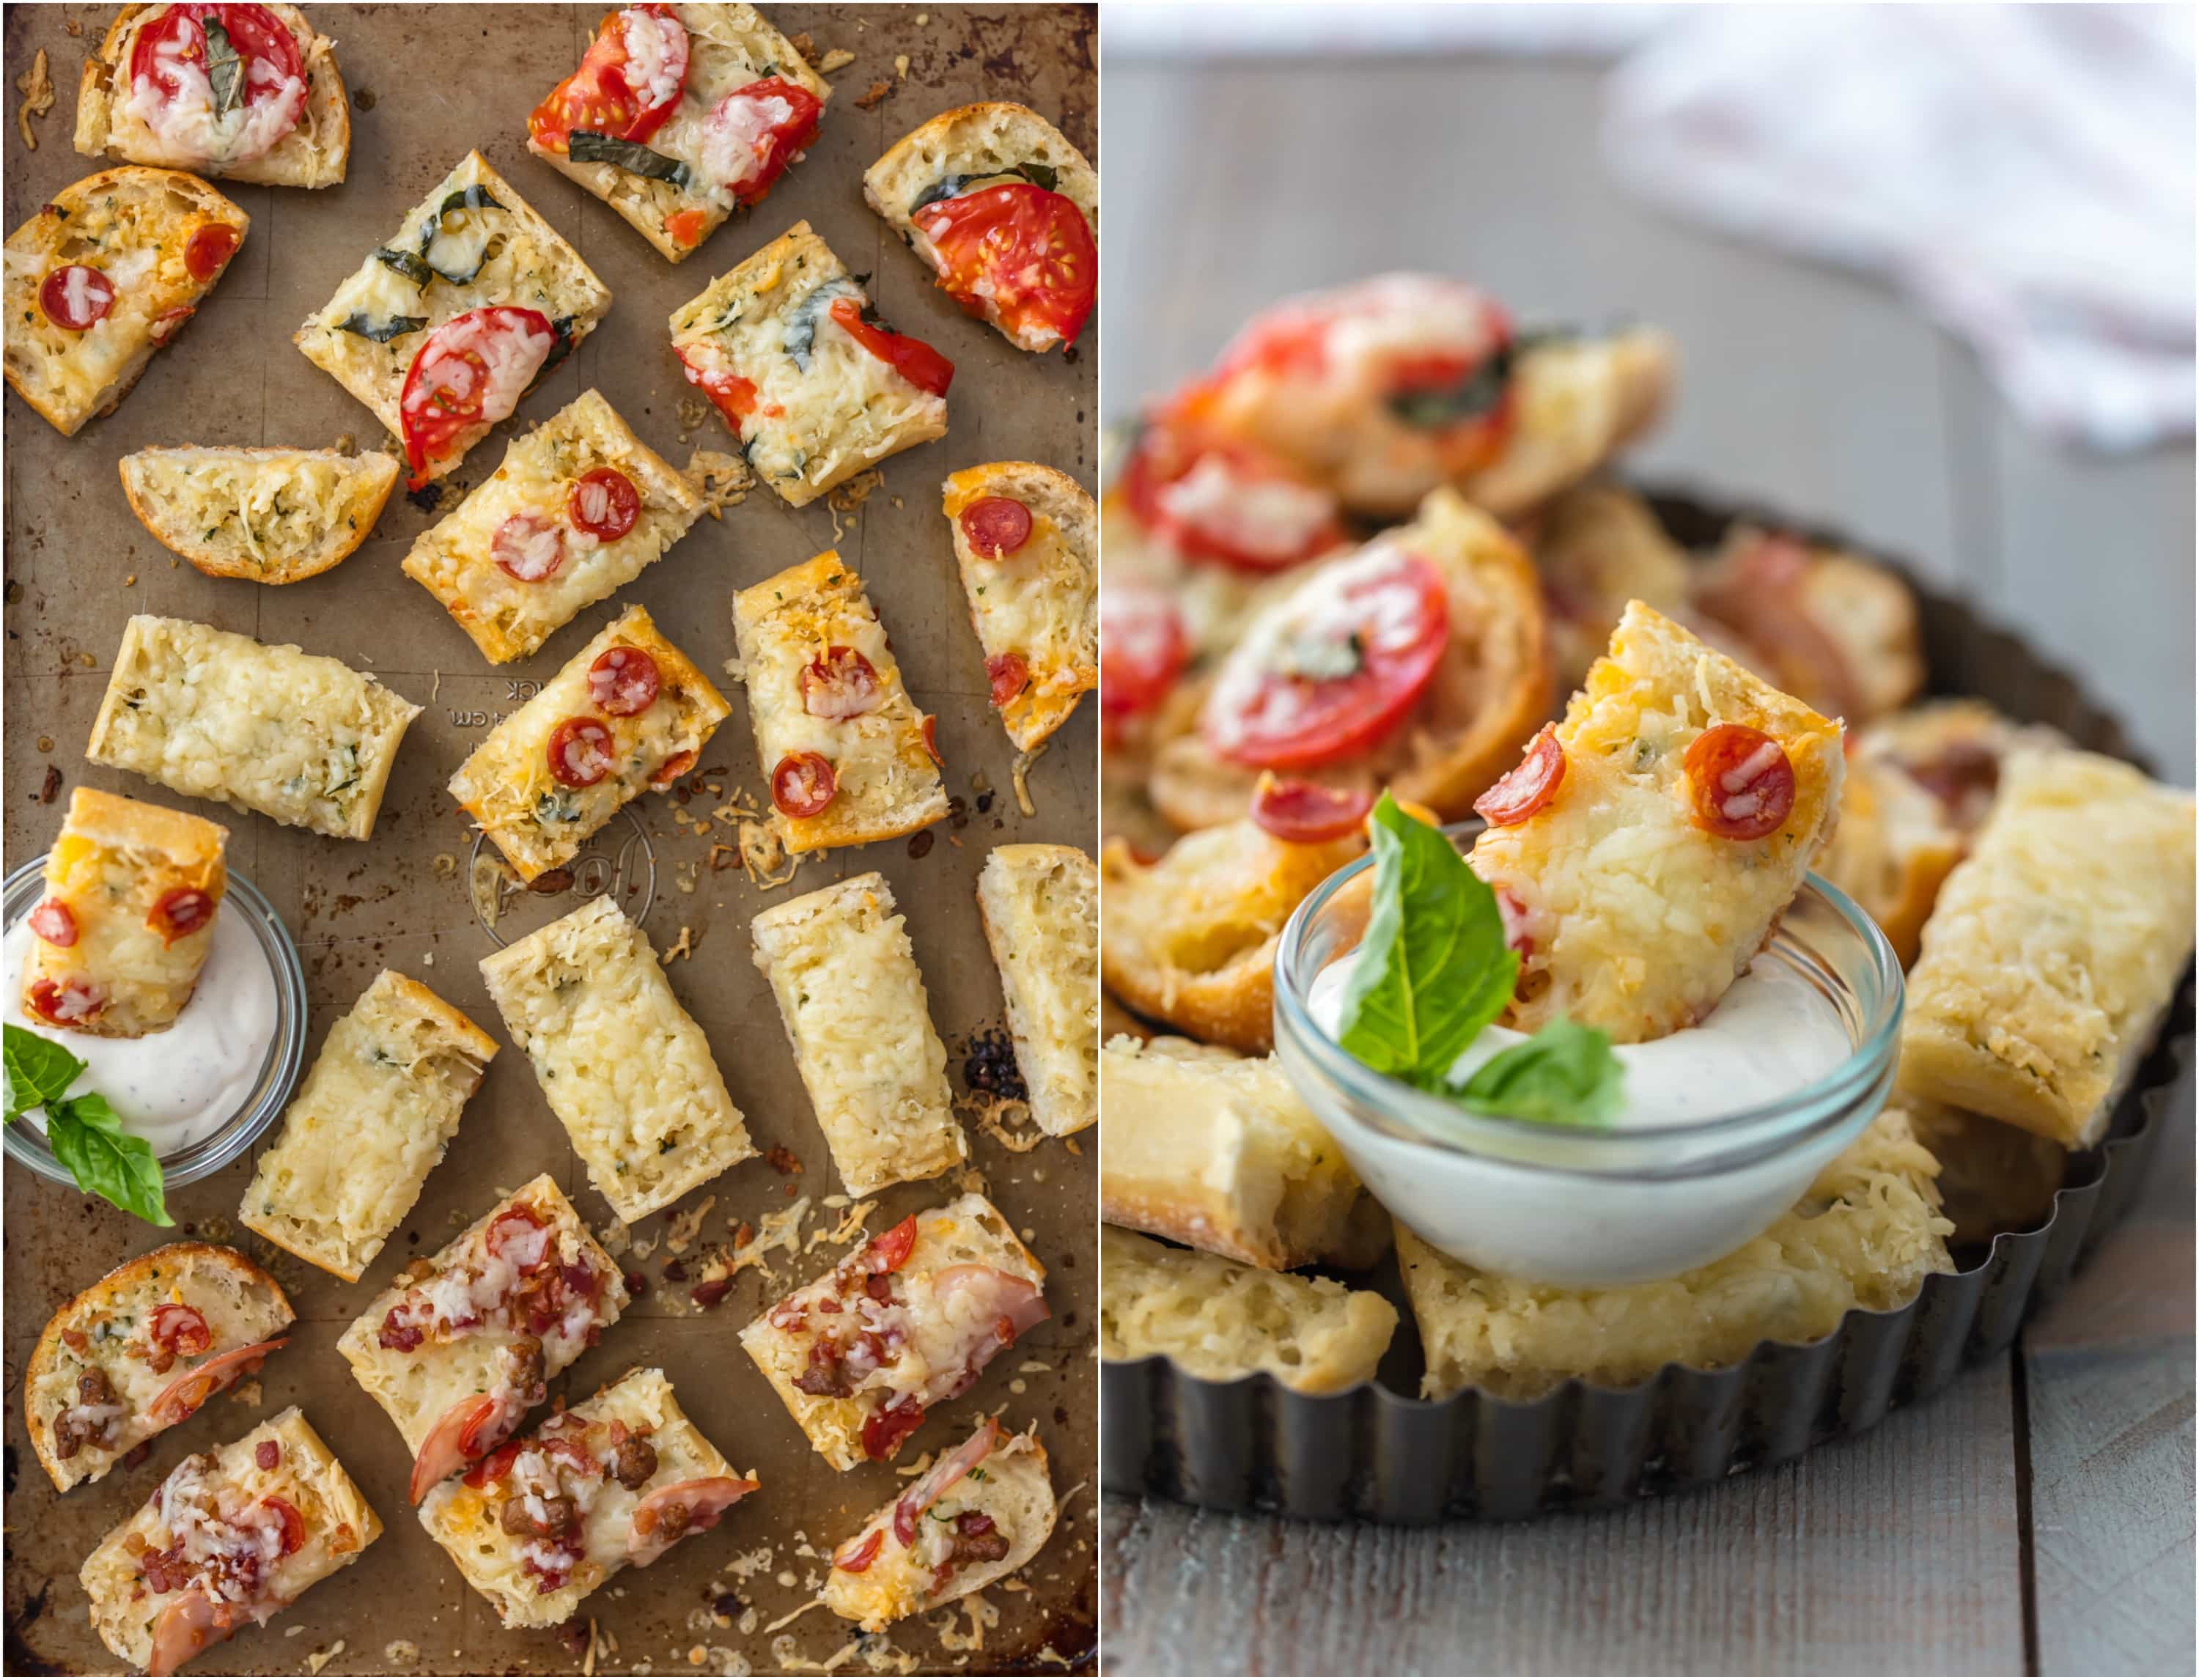 These GARLIC BUTTER FRENCH BREAD PIZZA BITES are the easiest and tastiest cheesy appetizer! Loaded with garlic butter, cheese, and all your favorite toppings! I say these are an appetizer, but we may just eat them as an entire meal!